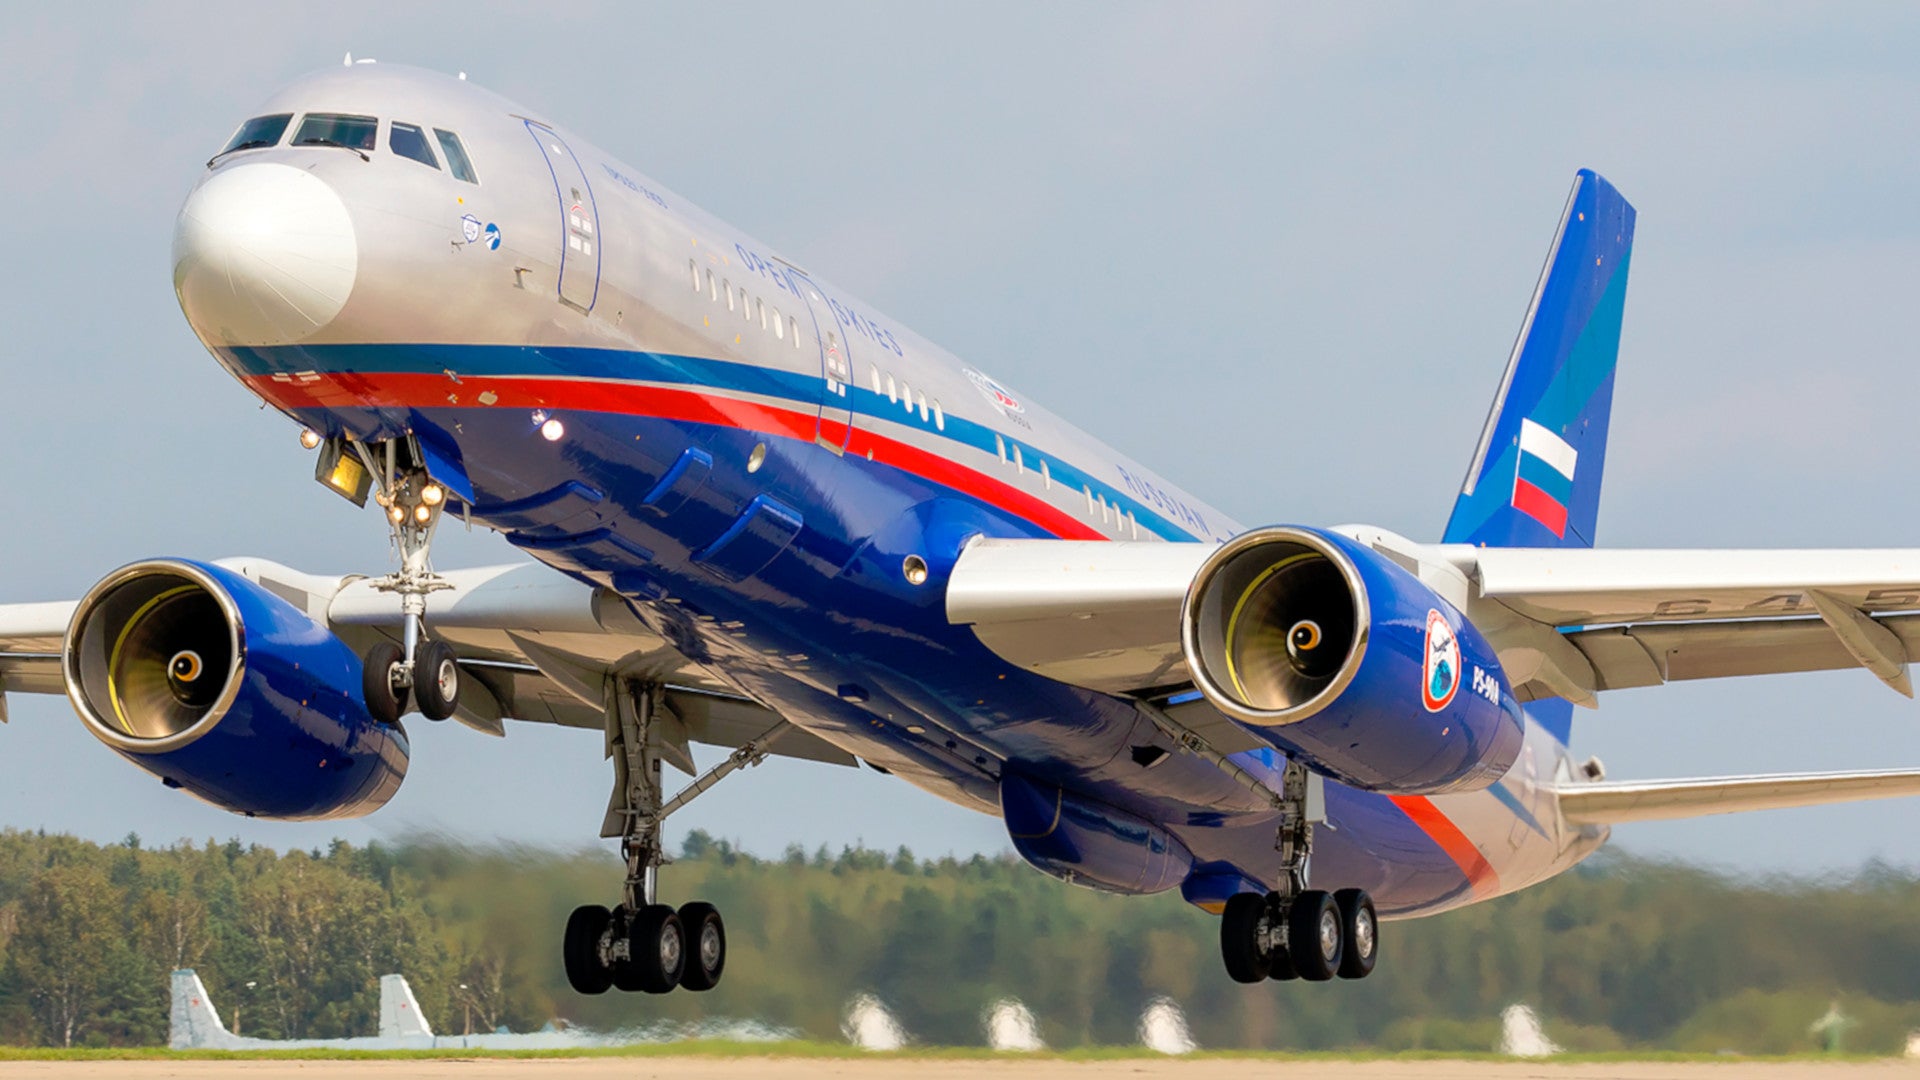 Russia’s New Surveillance Jet To Make First U.S. Visit To Photograph Military Bases